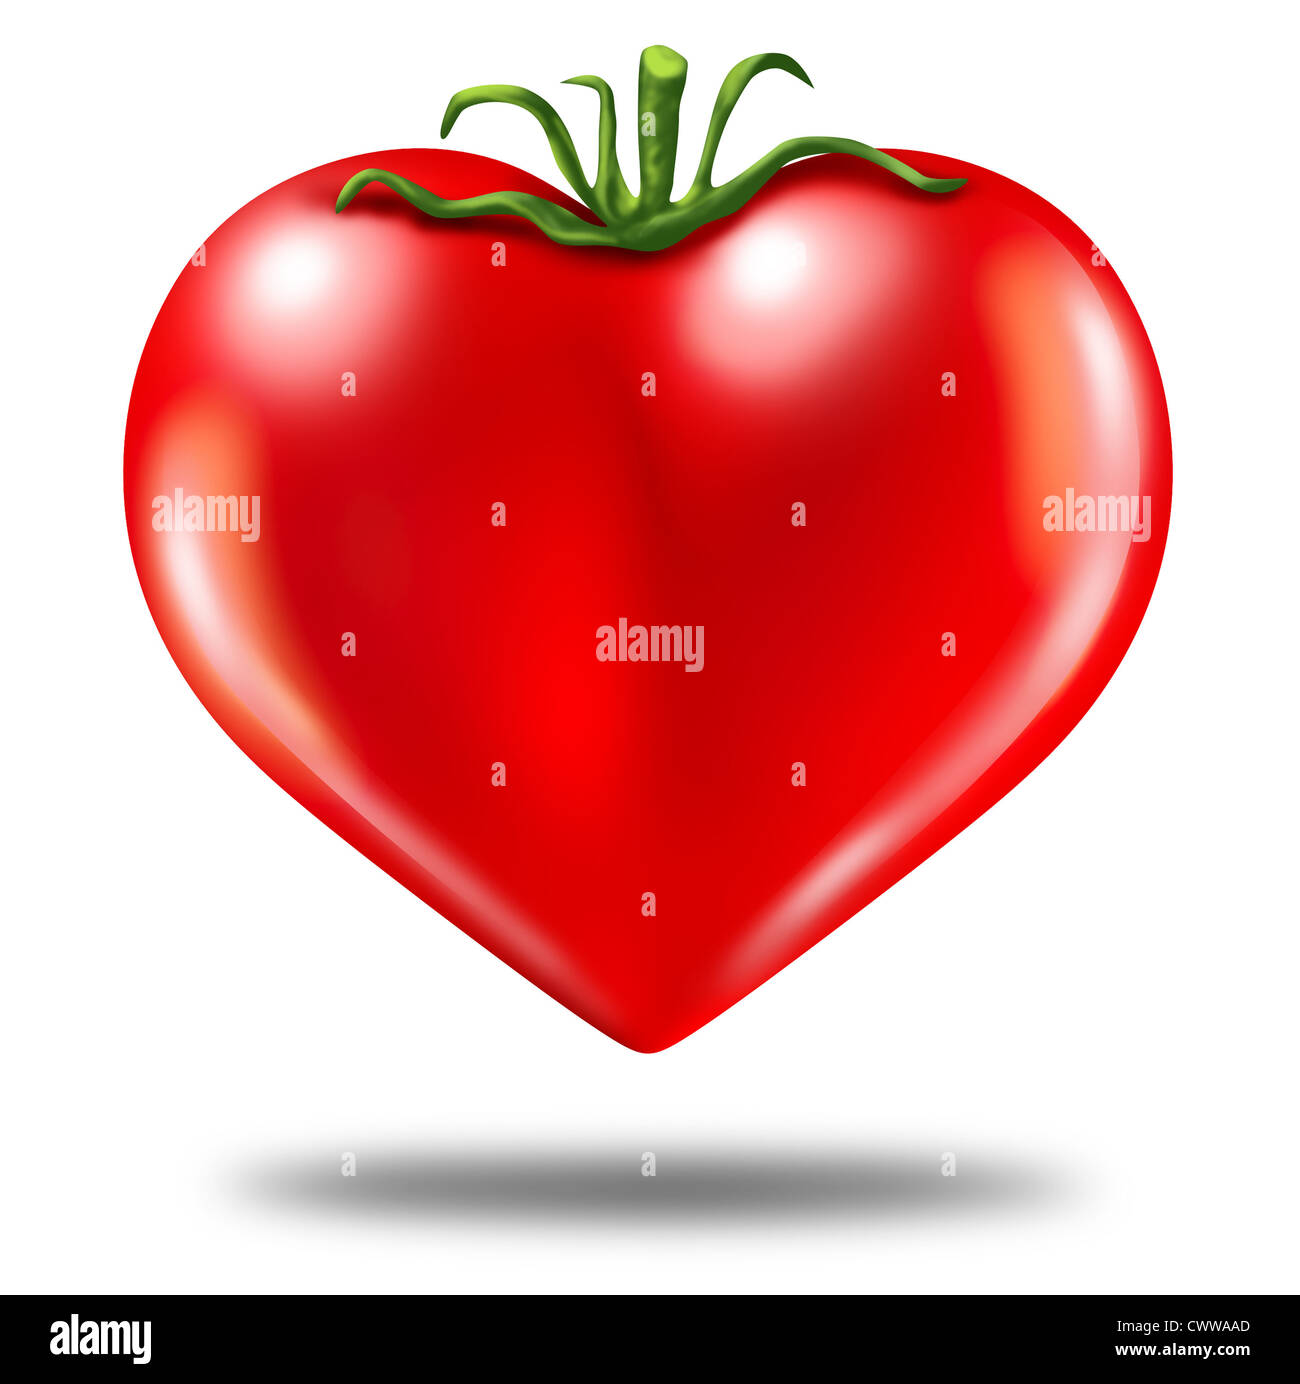 Healthy lifestyle symbol represented by a red tomato in the shape of a heart to show the health concept of eating well with fruits and vegetables. Stock Photo